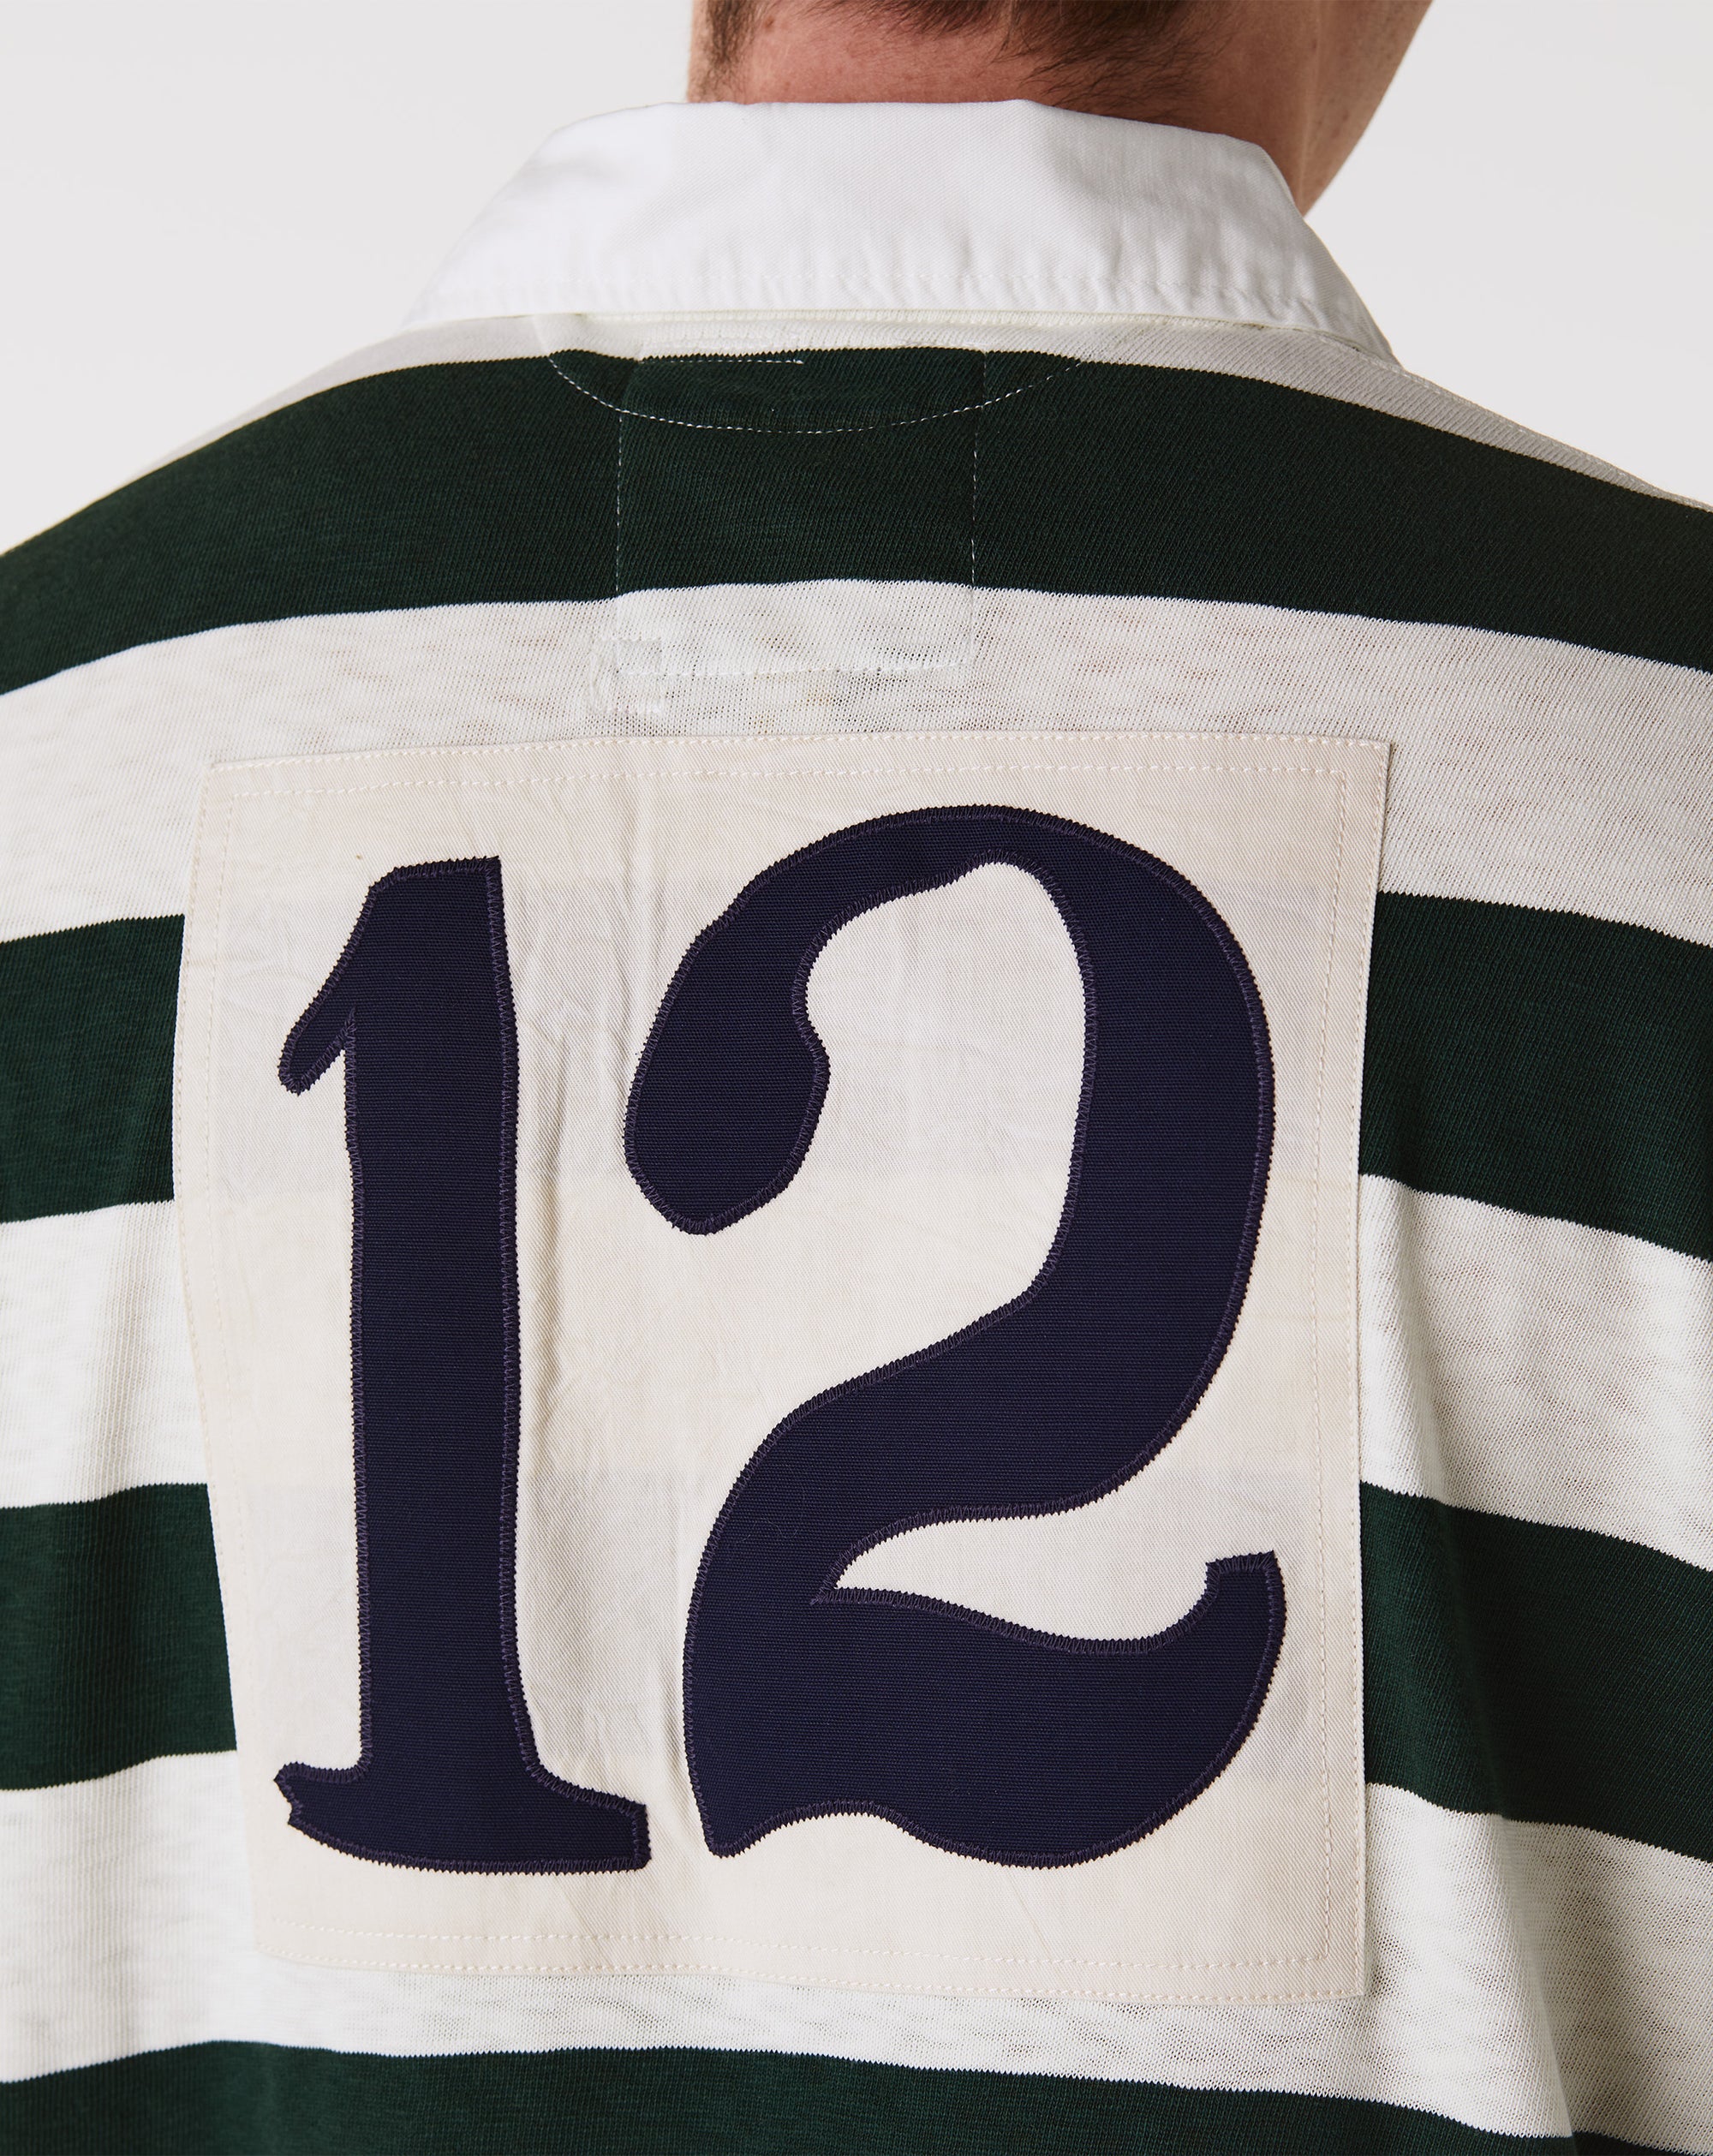 Polo Ralph Lauren Stripe Rugby Shirt - Rule of Next Apparel